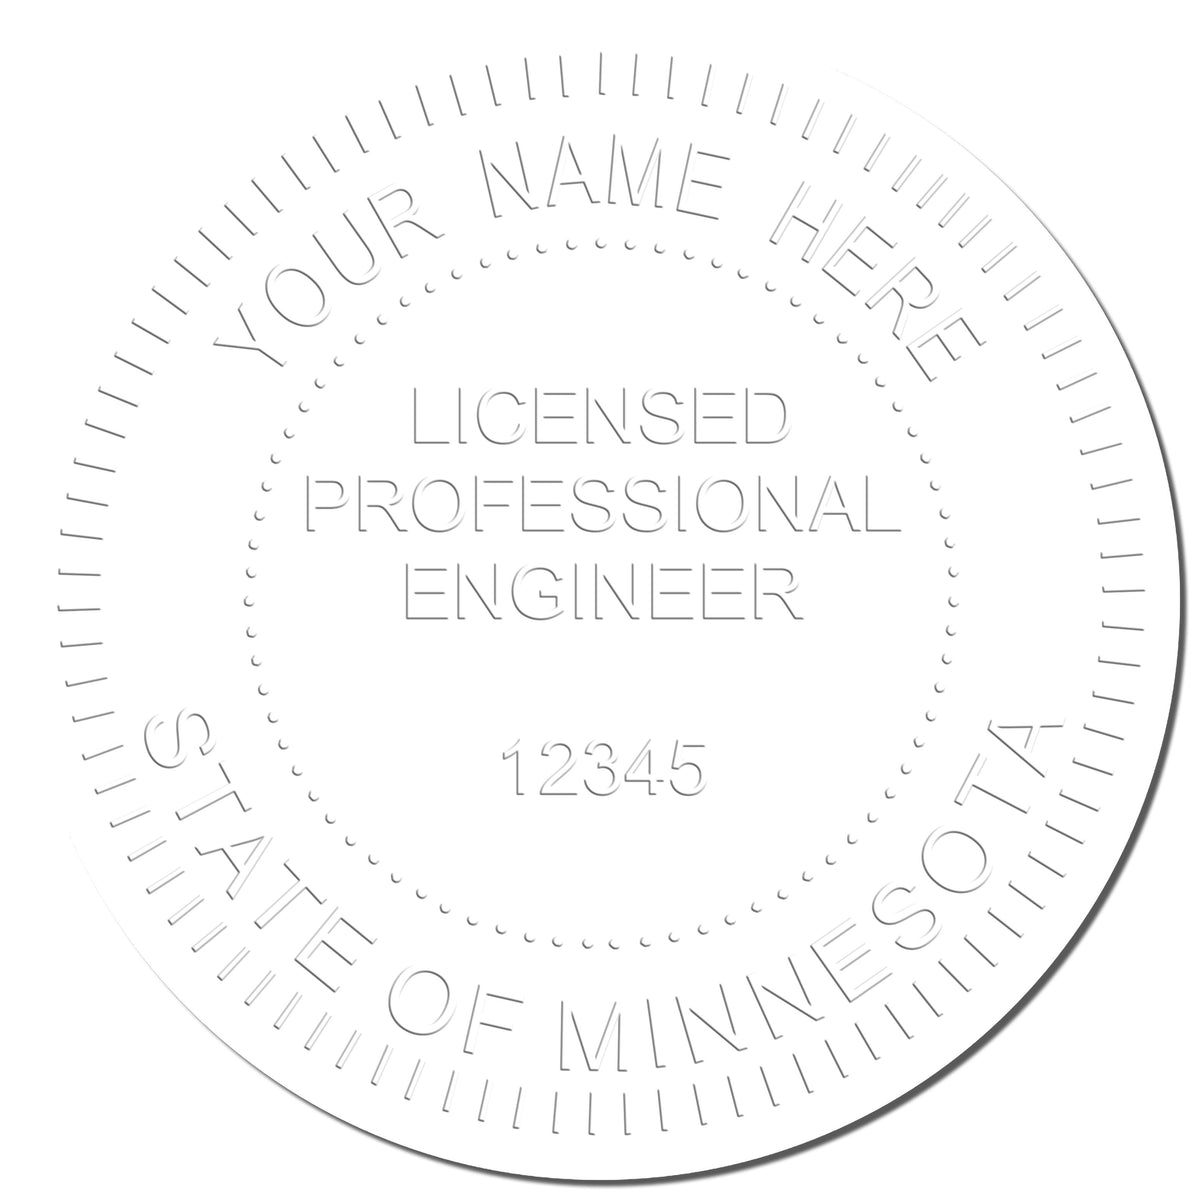 A photograph of the Handheld Minnesota Professional Engineer Embosser stamp impression reveals a vivid, professional image of the on paper.